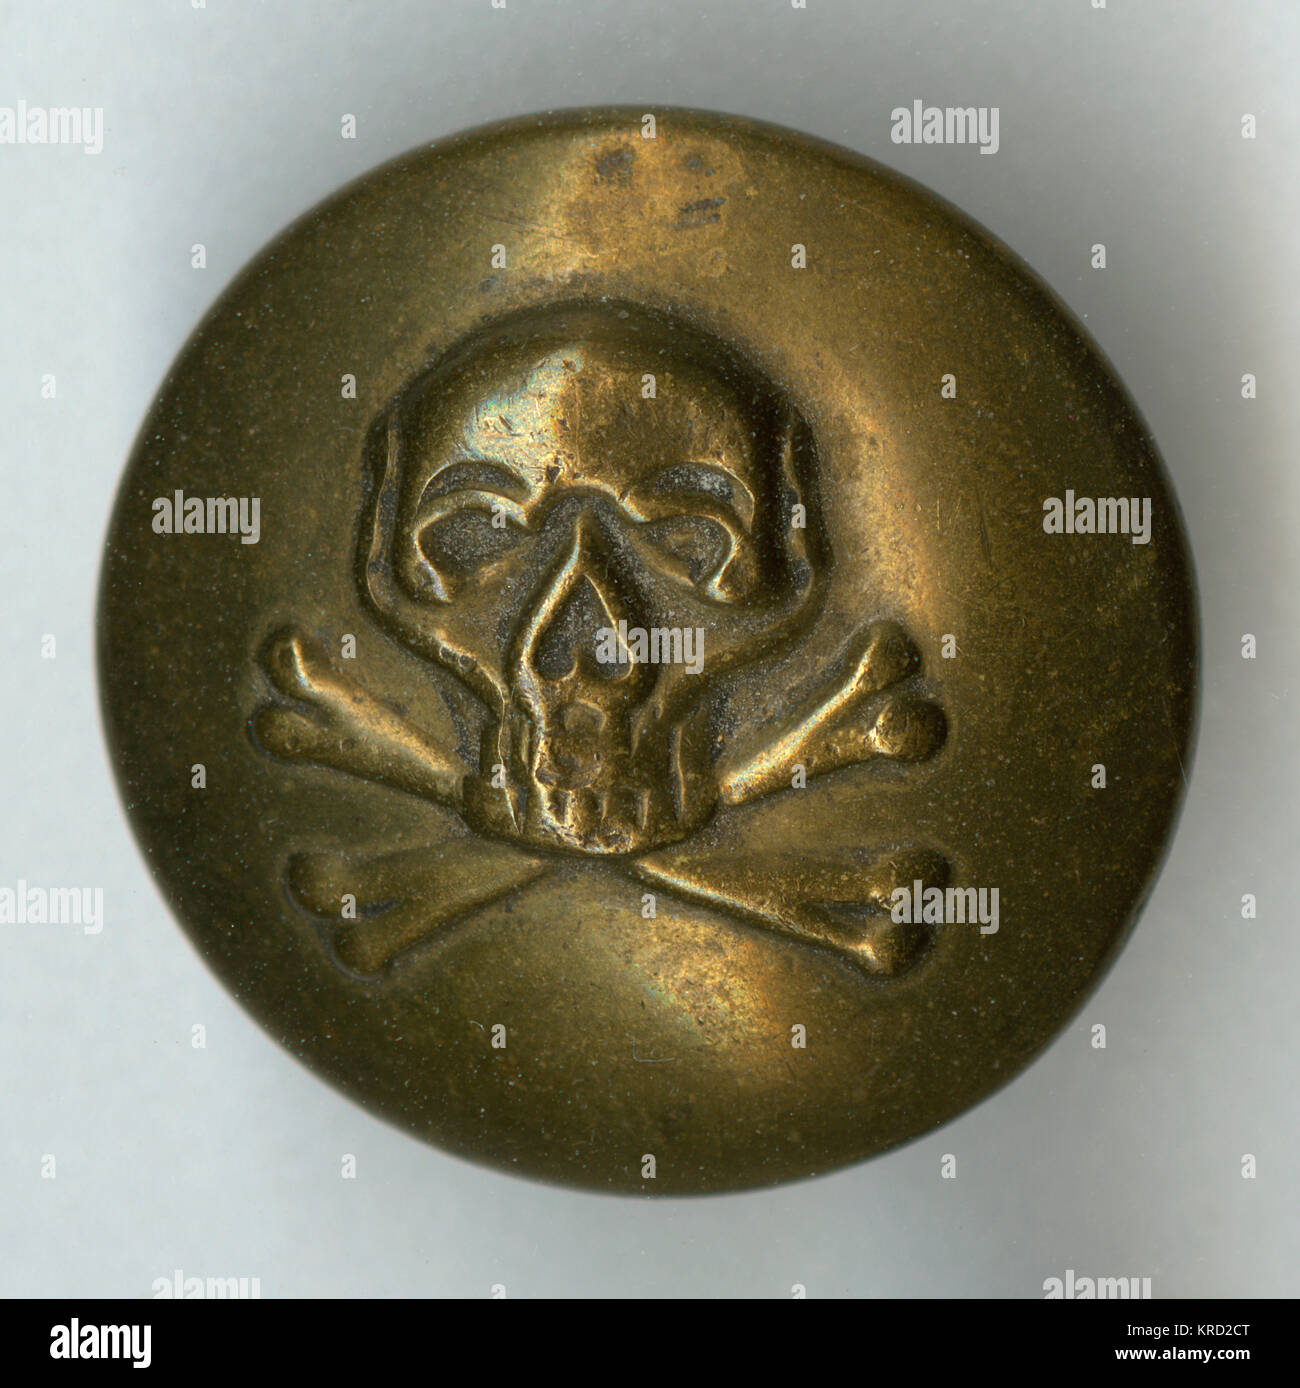 Skull and crossbones military button Stock Photo